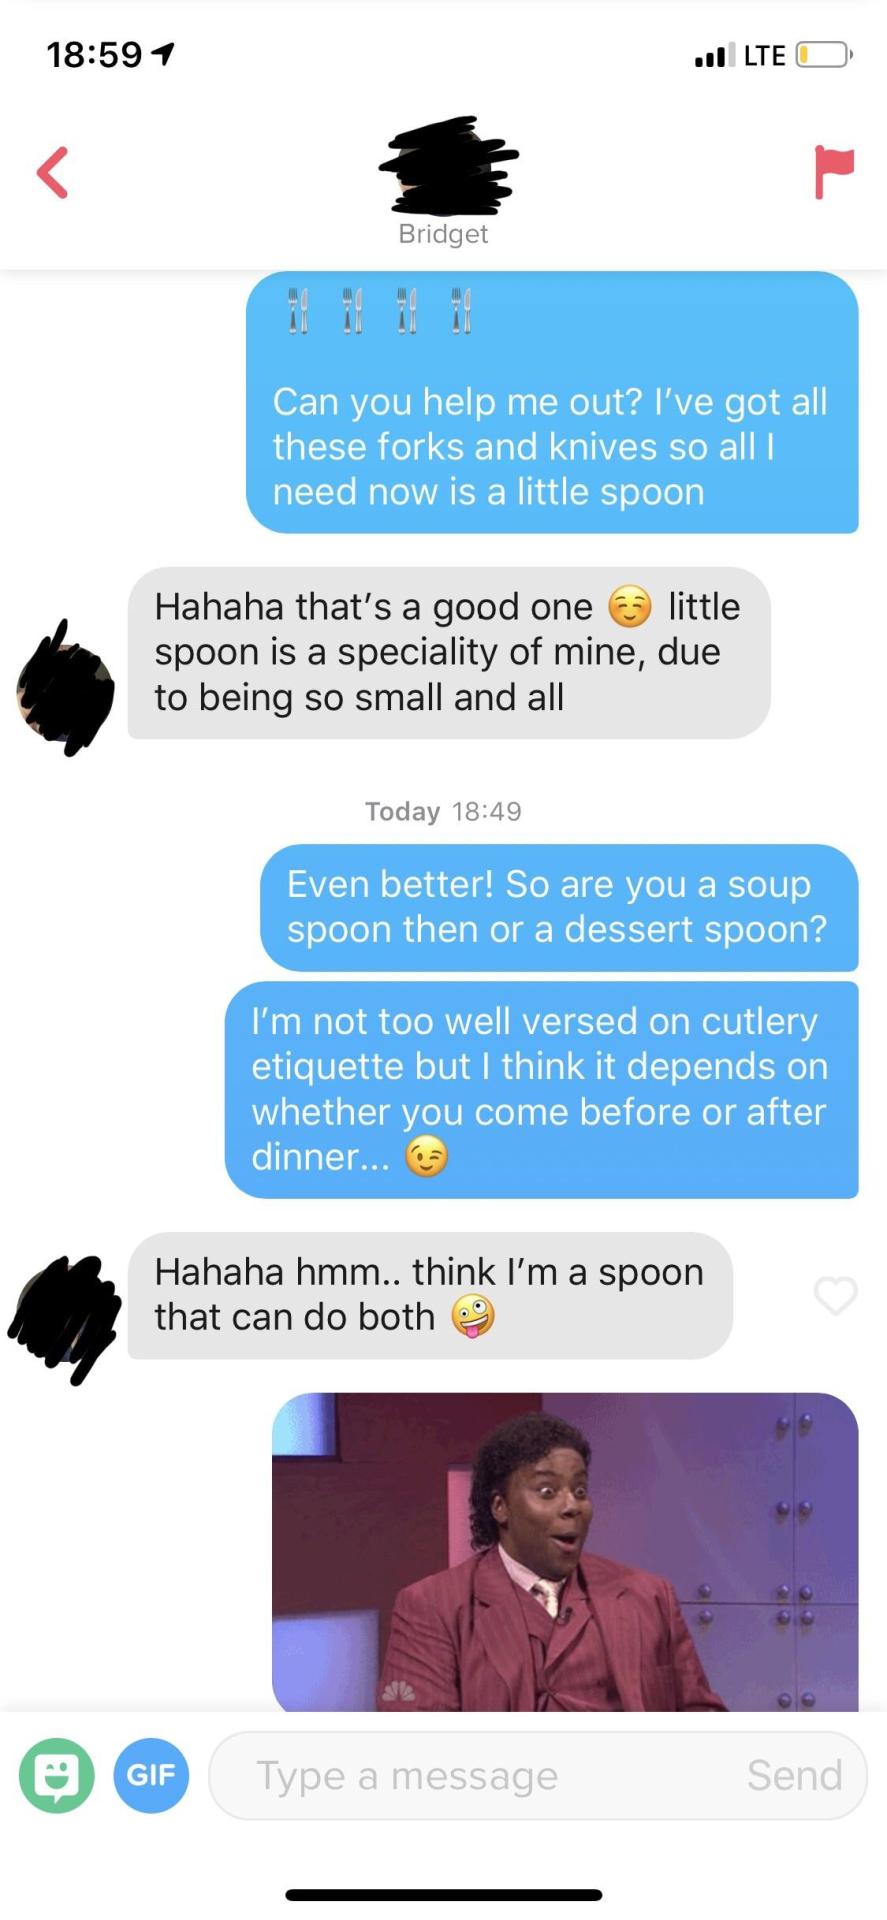 tinder - ve got all these forks and knives all i need is a little spoon - Jilte O Bridget Can you help me out? I've got all these forks and knives so all need now is a little spoon Hahaha that's a good one a little spoon is a speciality of mine, due to be